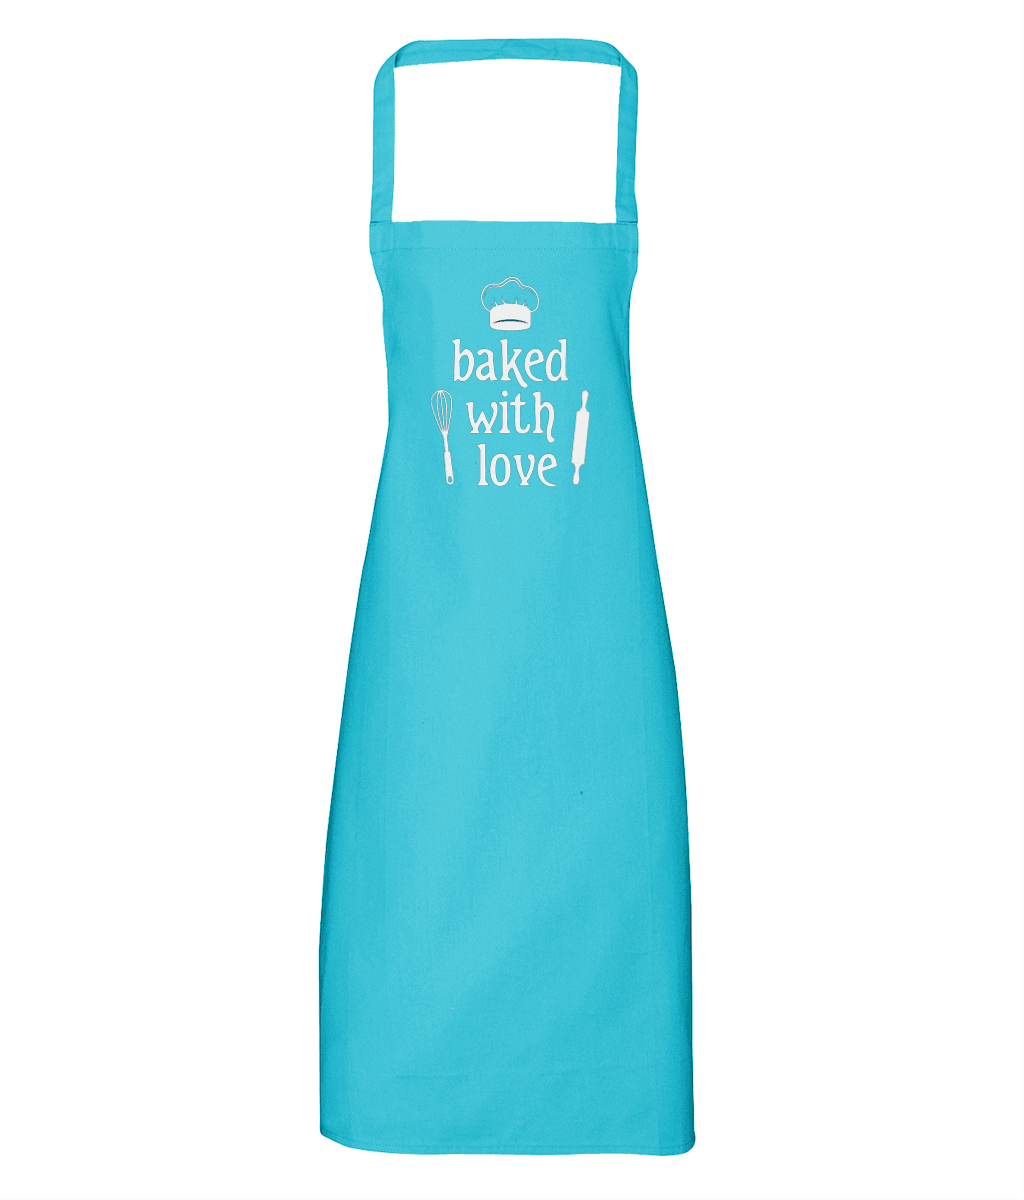 Baked with Love Cotton Apron - DuvetDay.co.uk